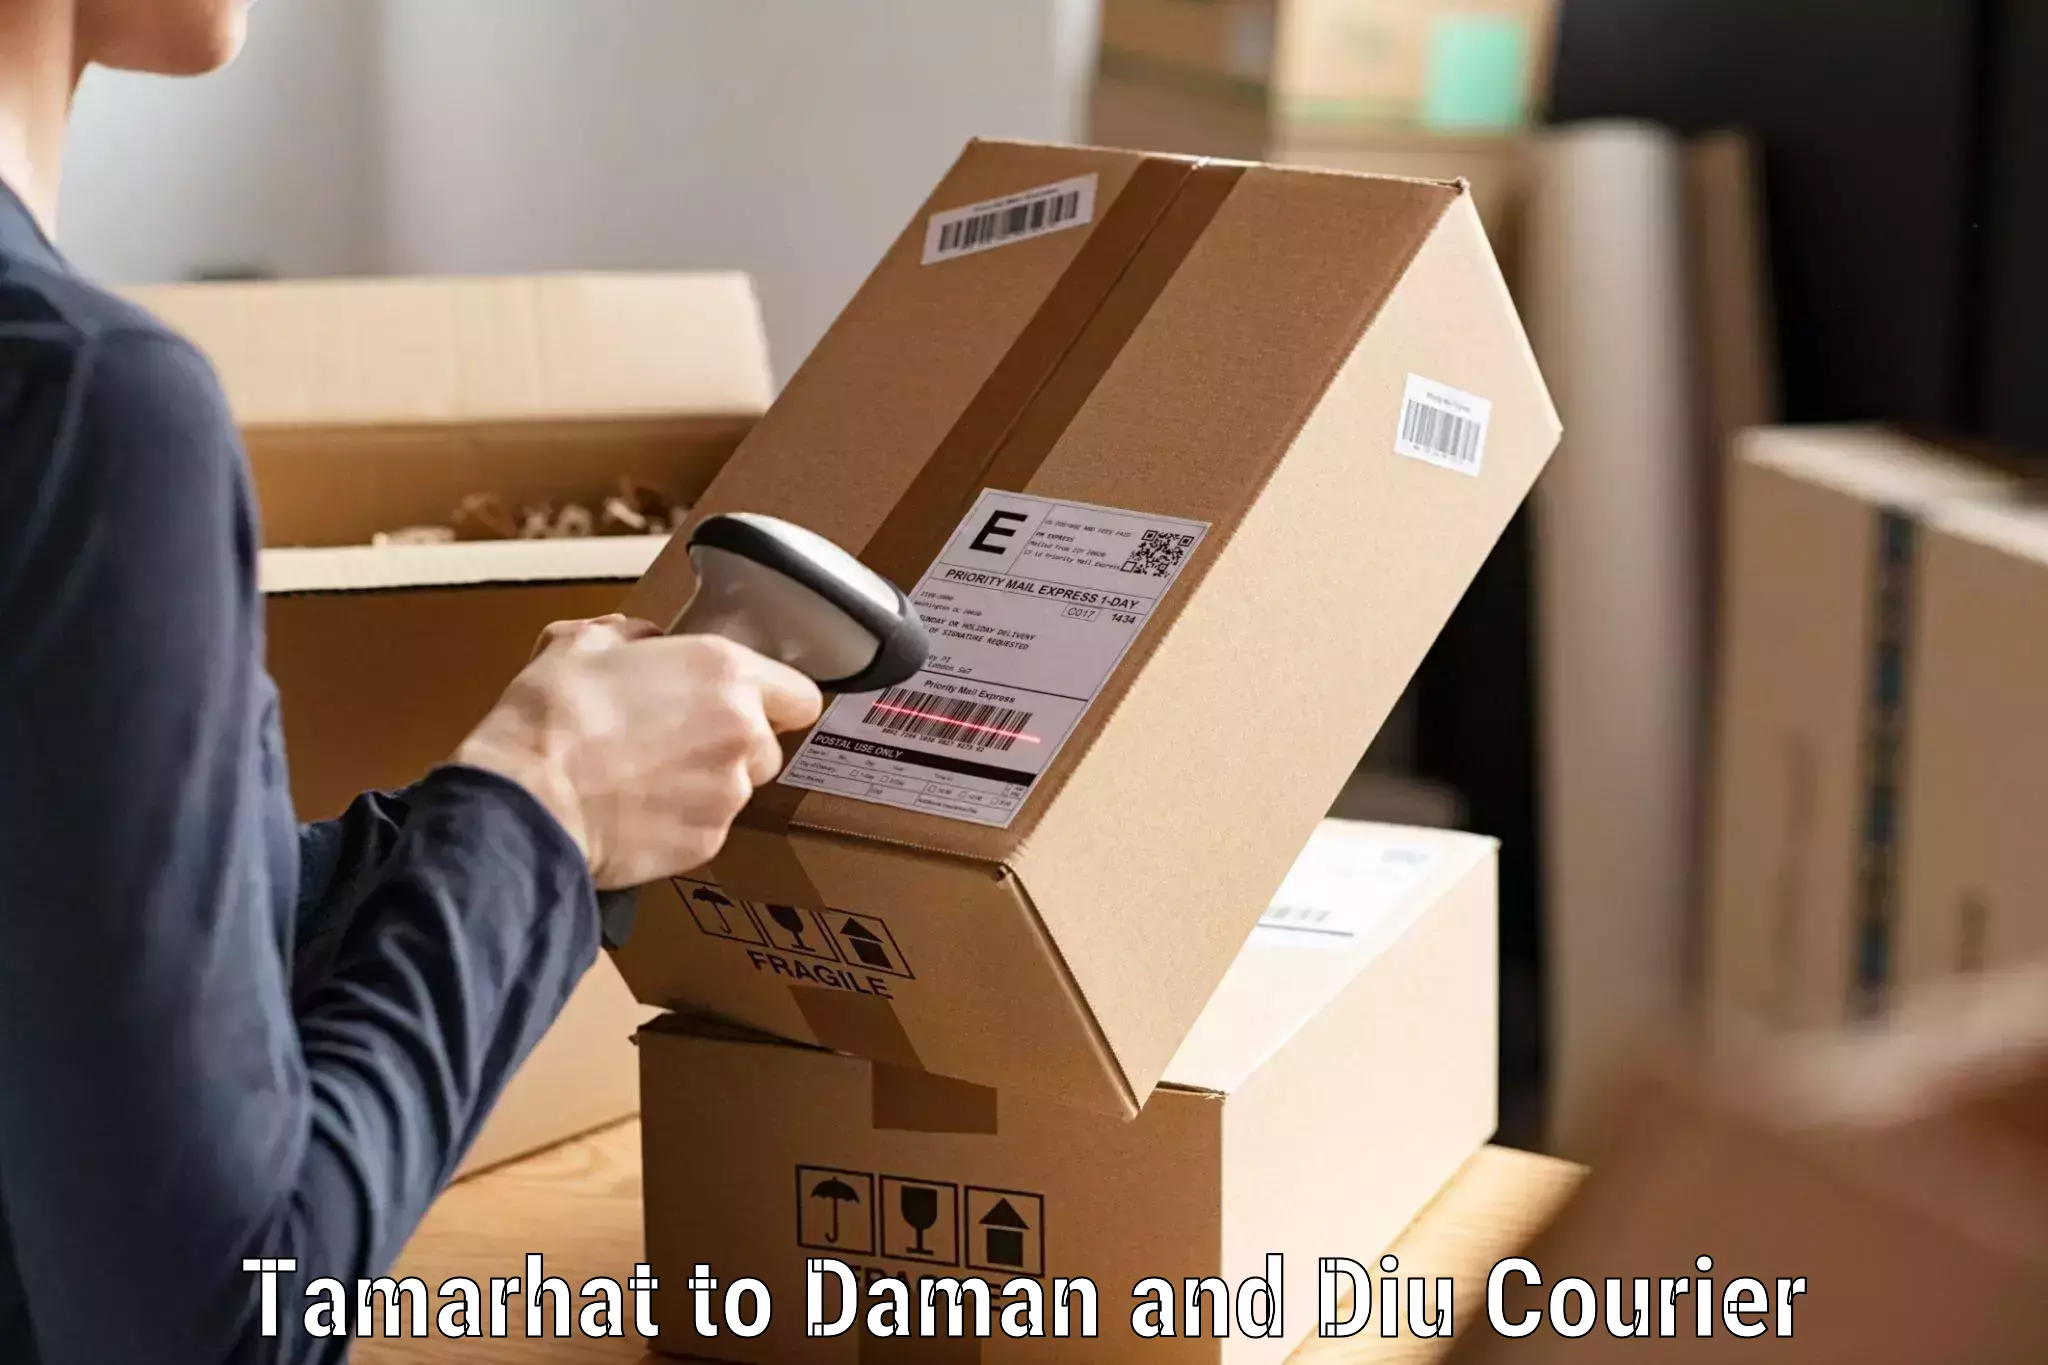 Professional parcel services Tamarhat to Diu